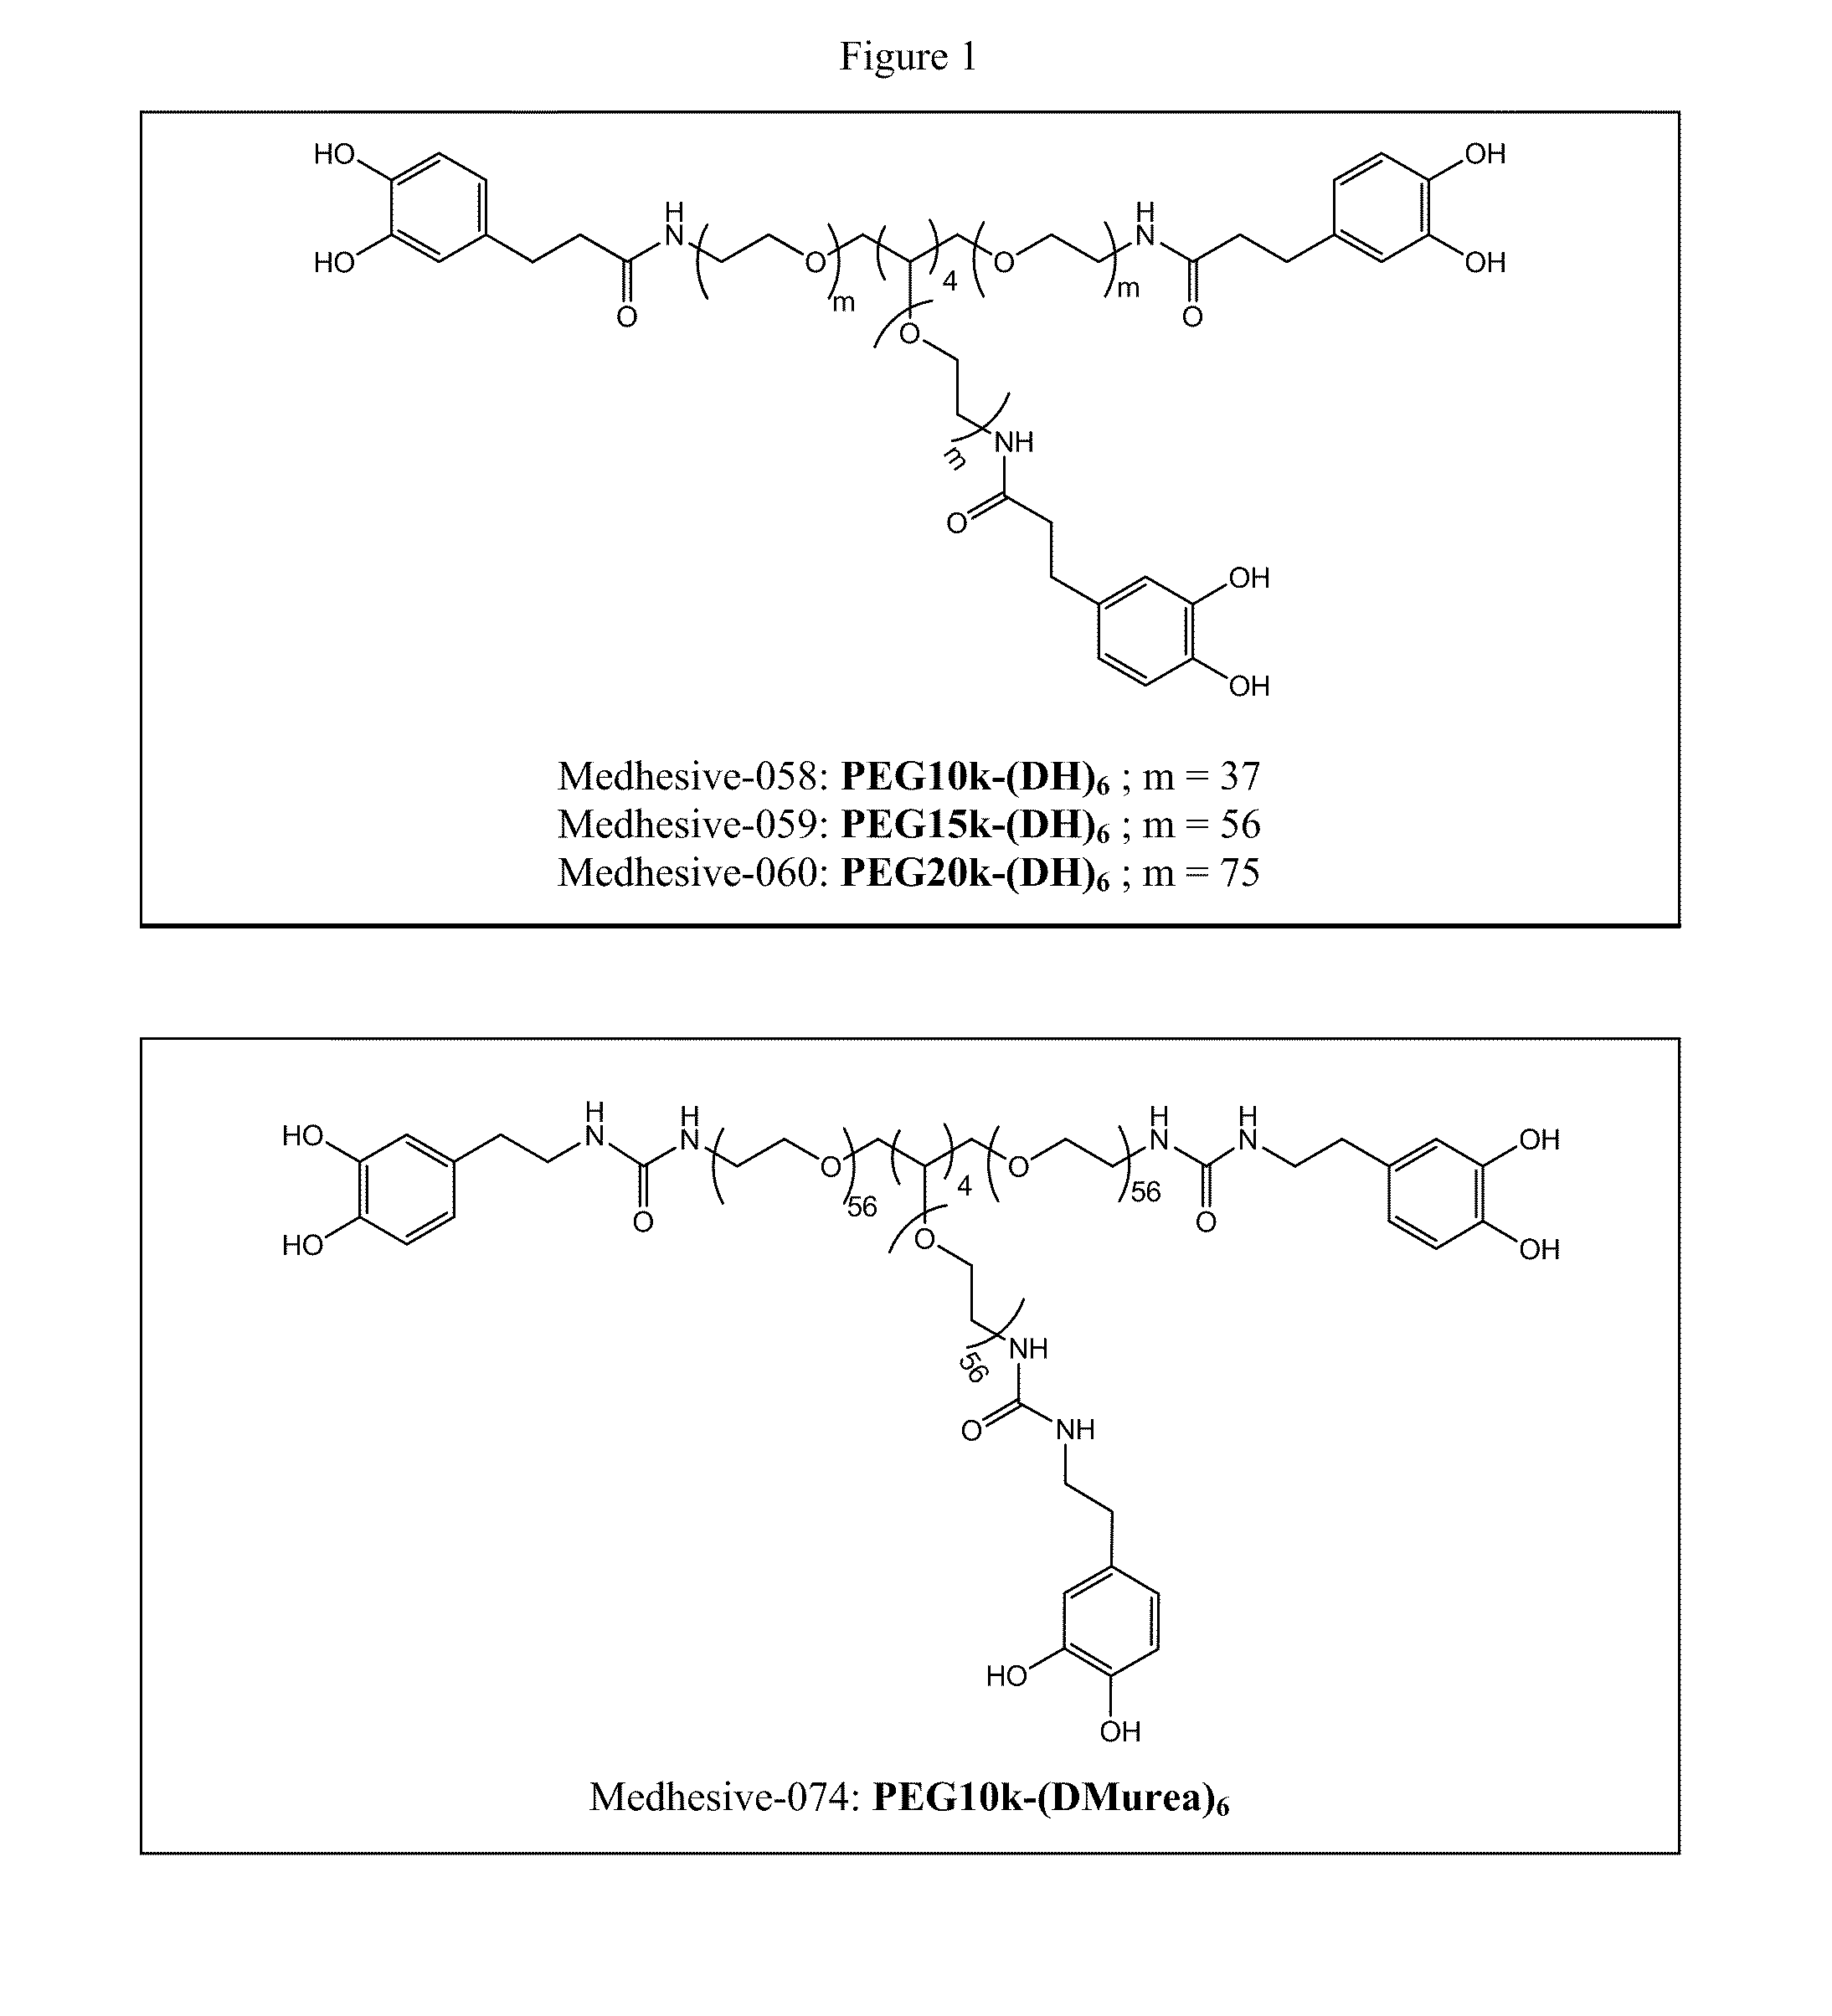 Multi-armed catechol compound blends